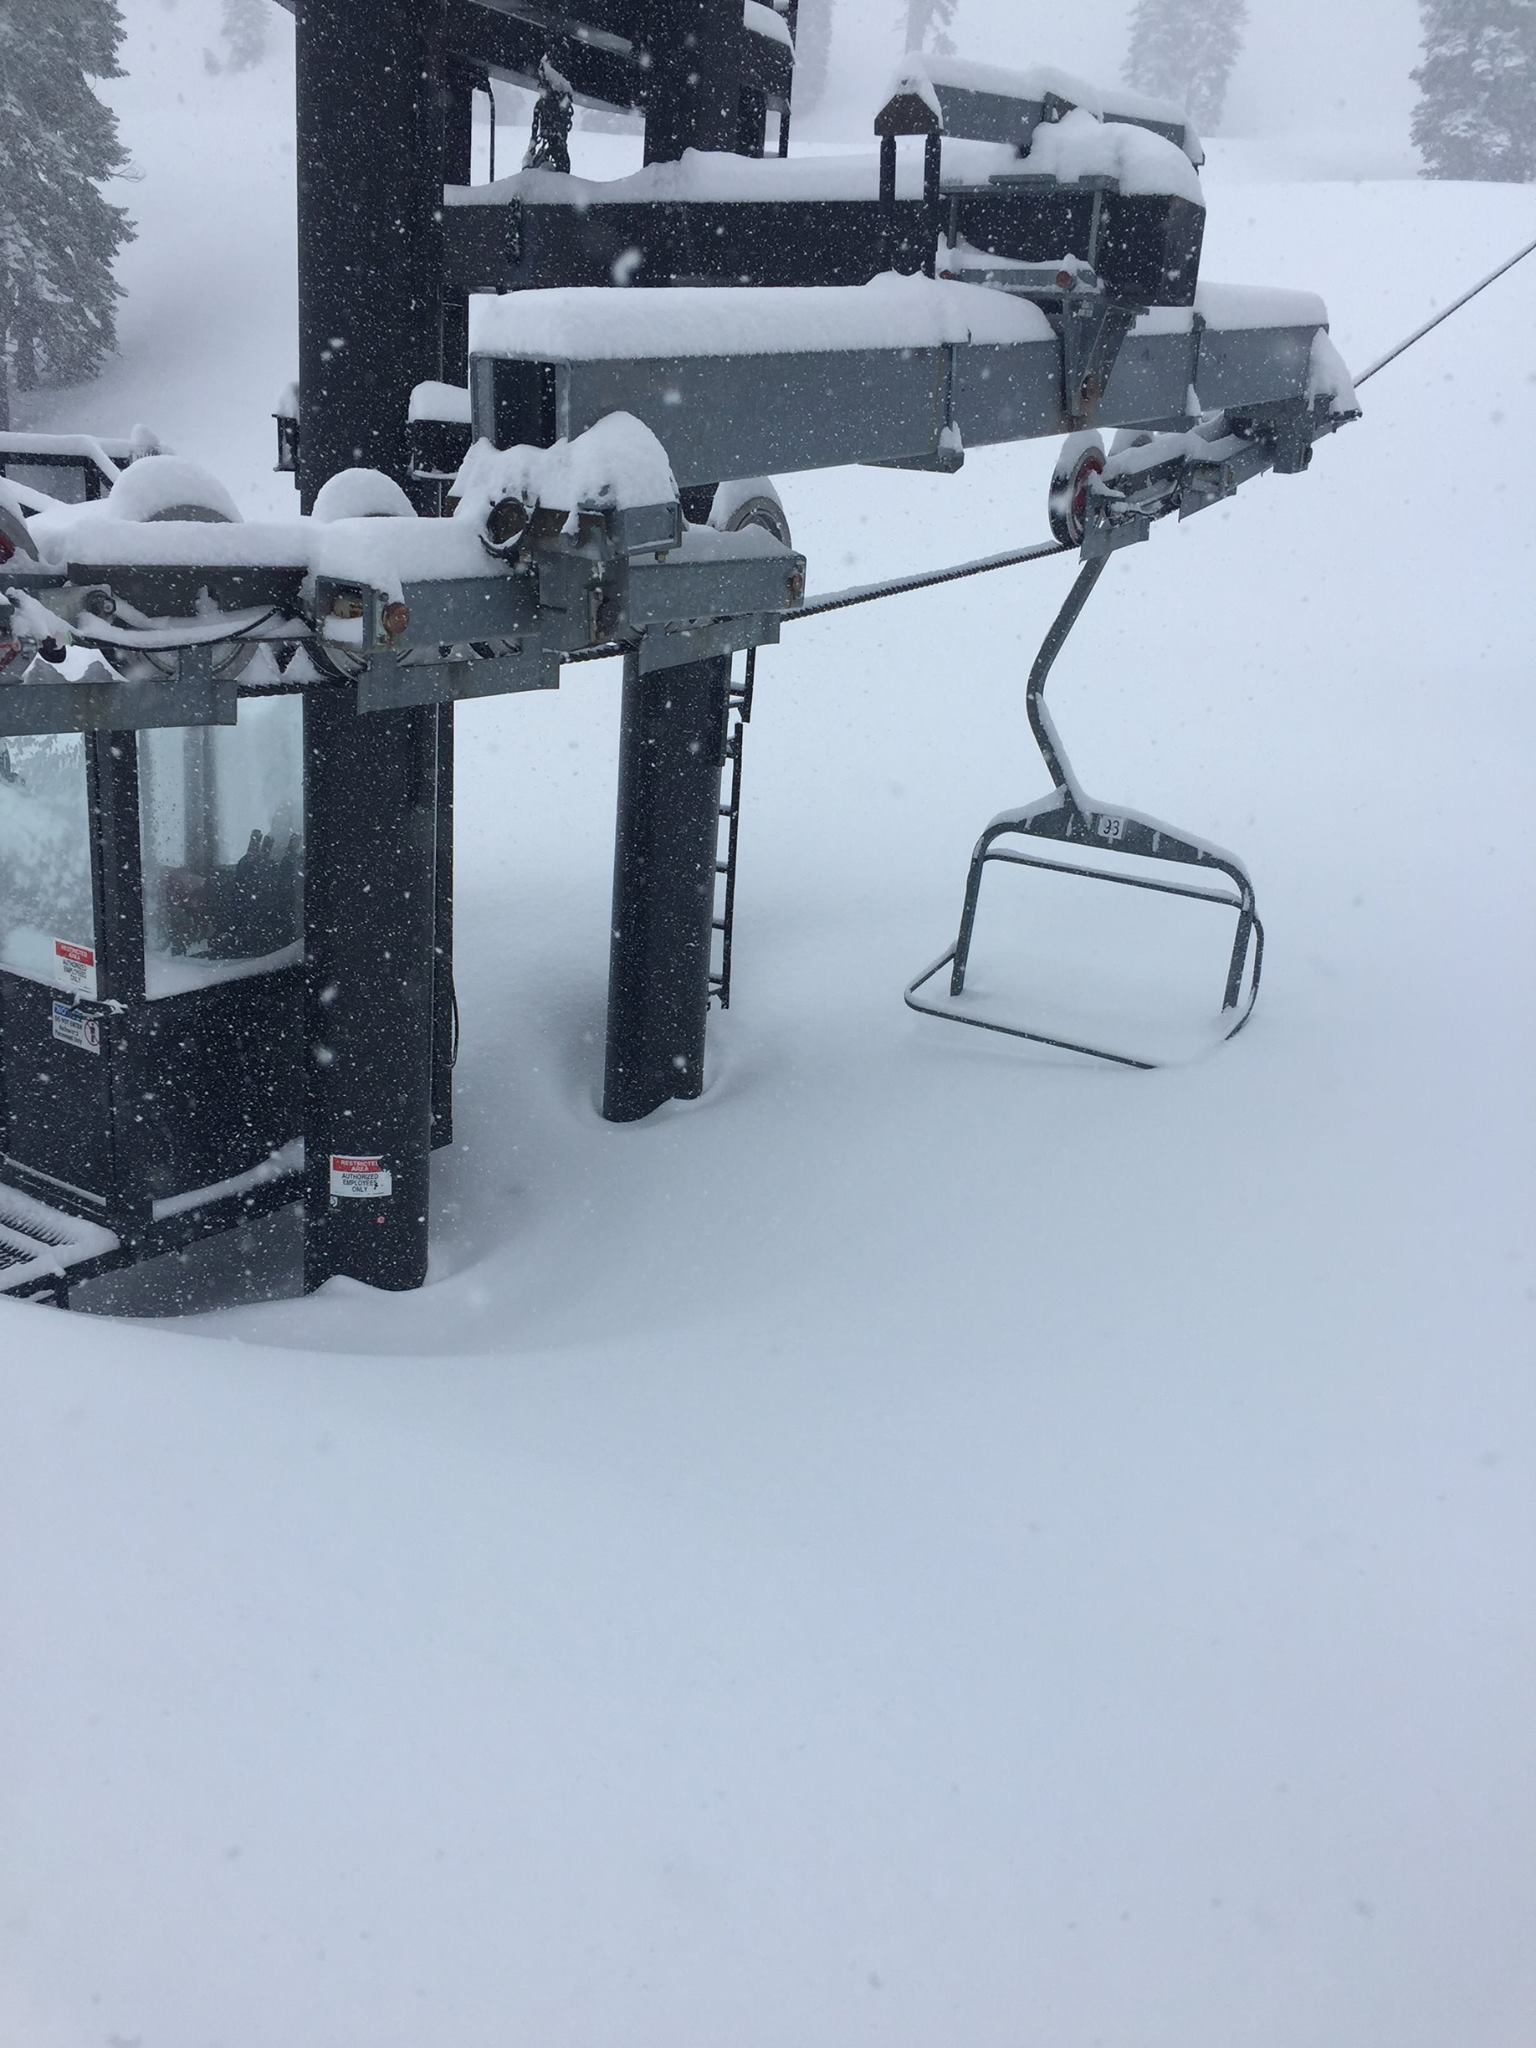 The snowfall has been INSANE so far. Image: Squaw Valley Facebook Page